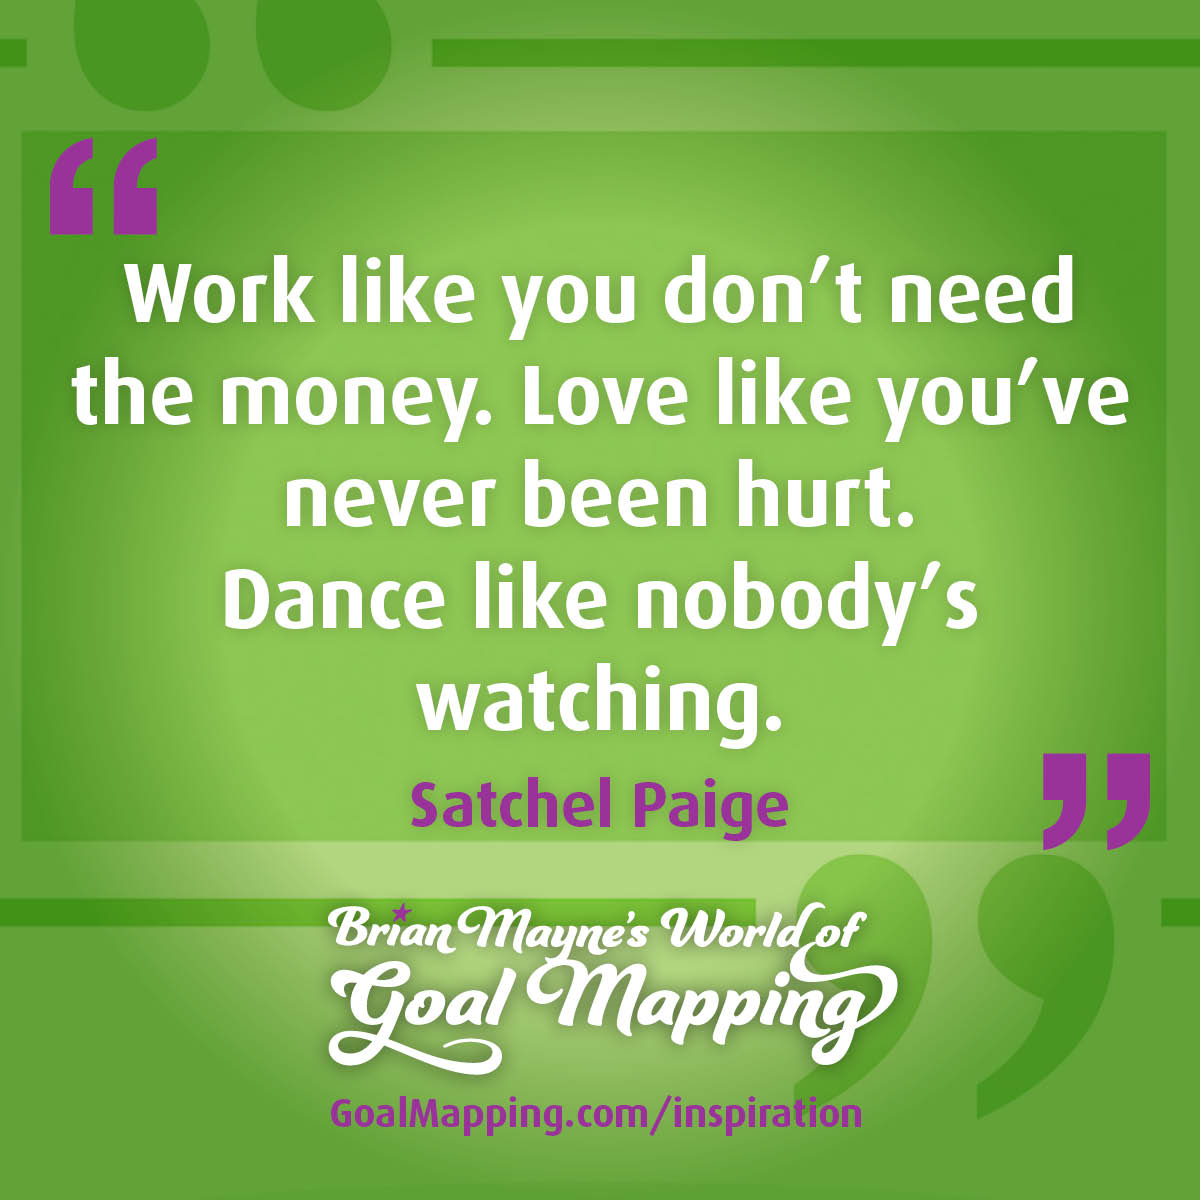 "Work like you don't need the money. Love like you've never been hurt. Dance like nobody's watching." Satchel Paige